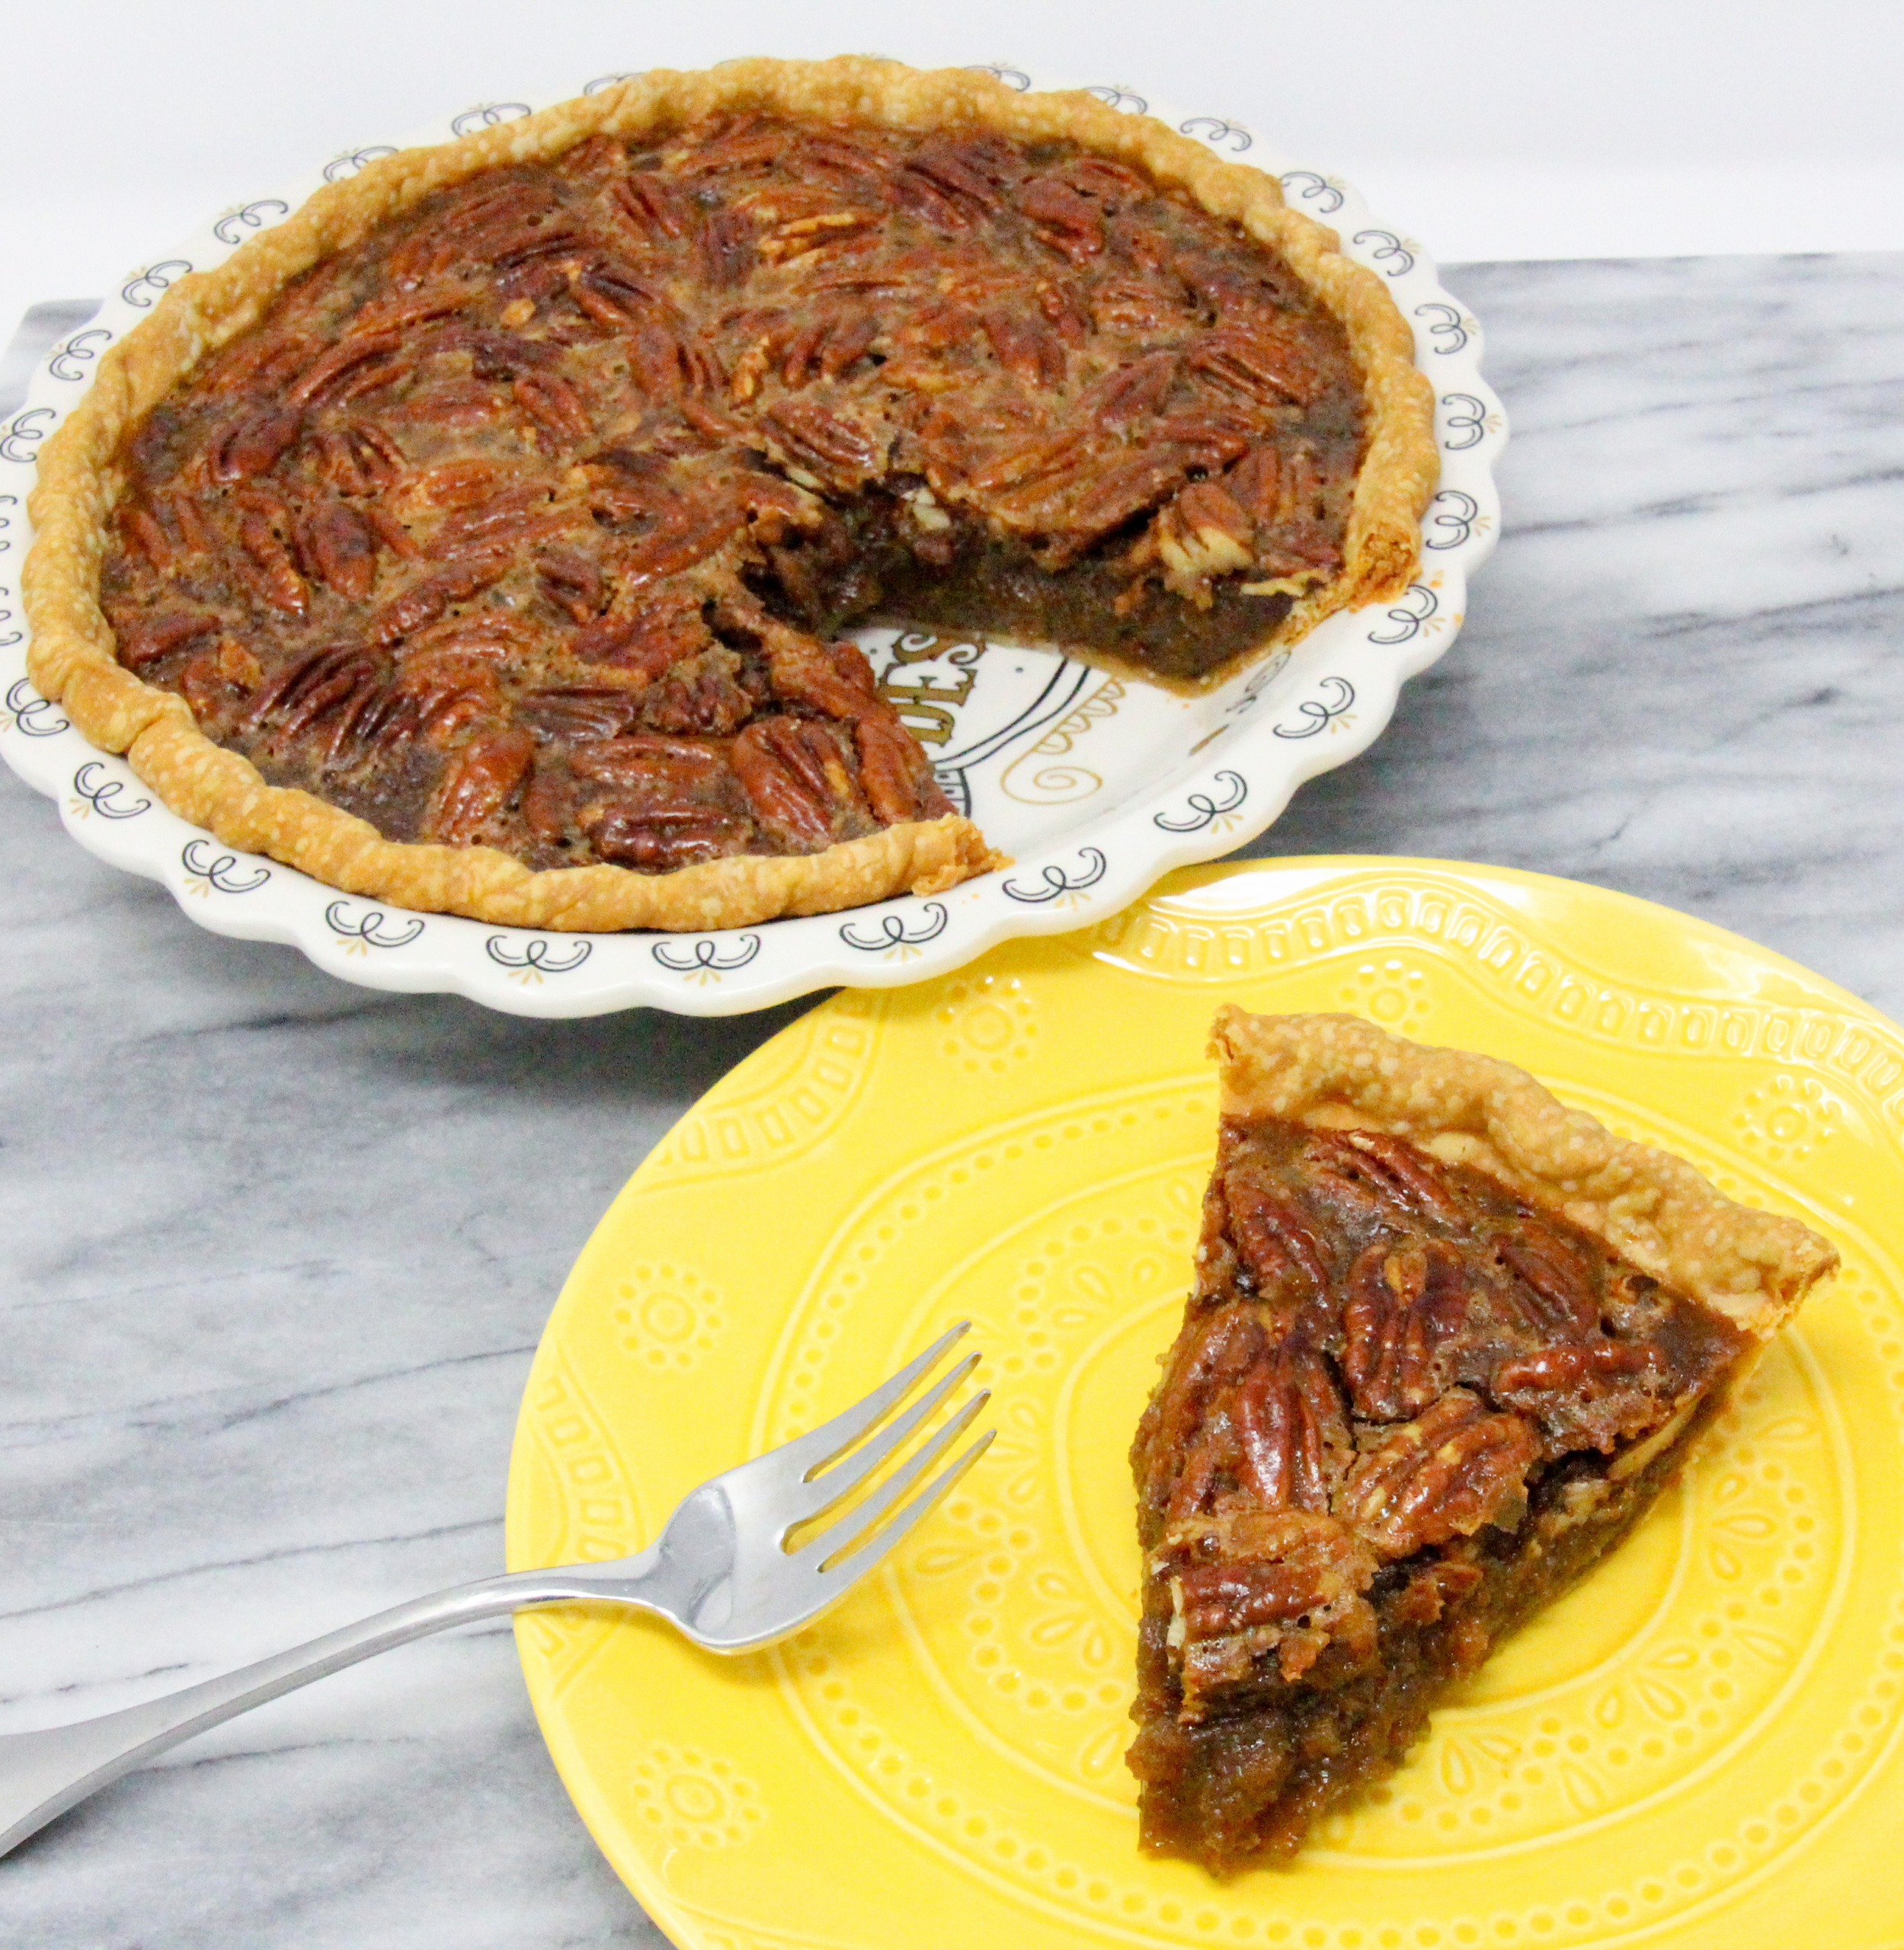 Cardamom Pecan Pie has plenty of natural sweetness thanks to maple syrup and a generous amount of pecans. The hint of cardamom elevates the flavor to scrumptious! Recipe shared with permission granted by Barbara Ross, author of MUDDLED THROUGH.